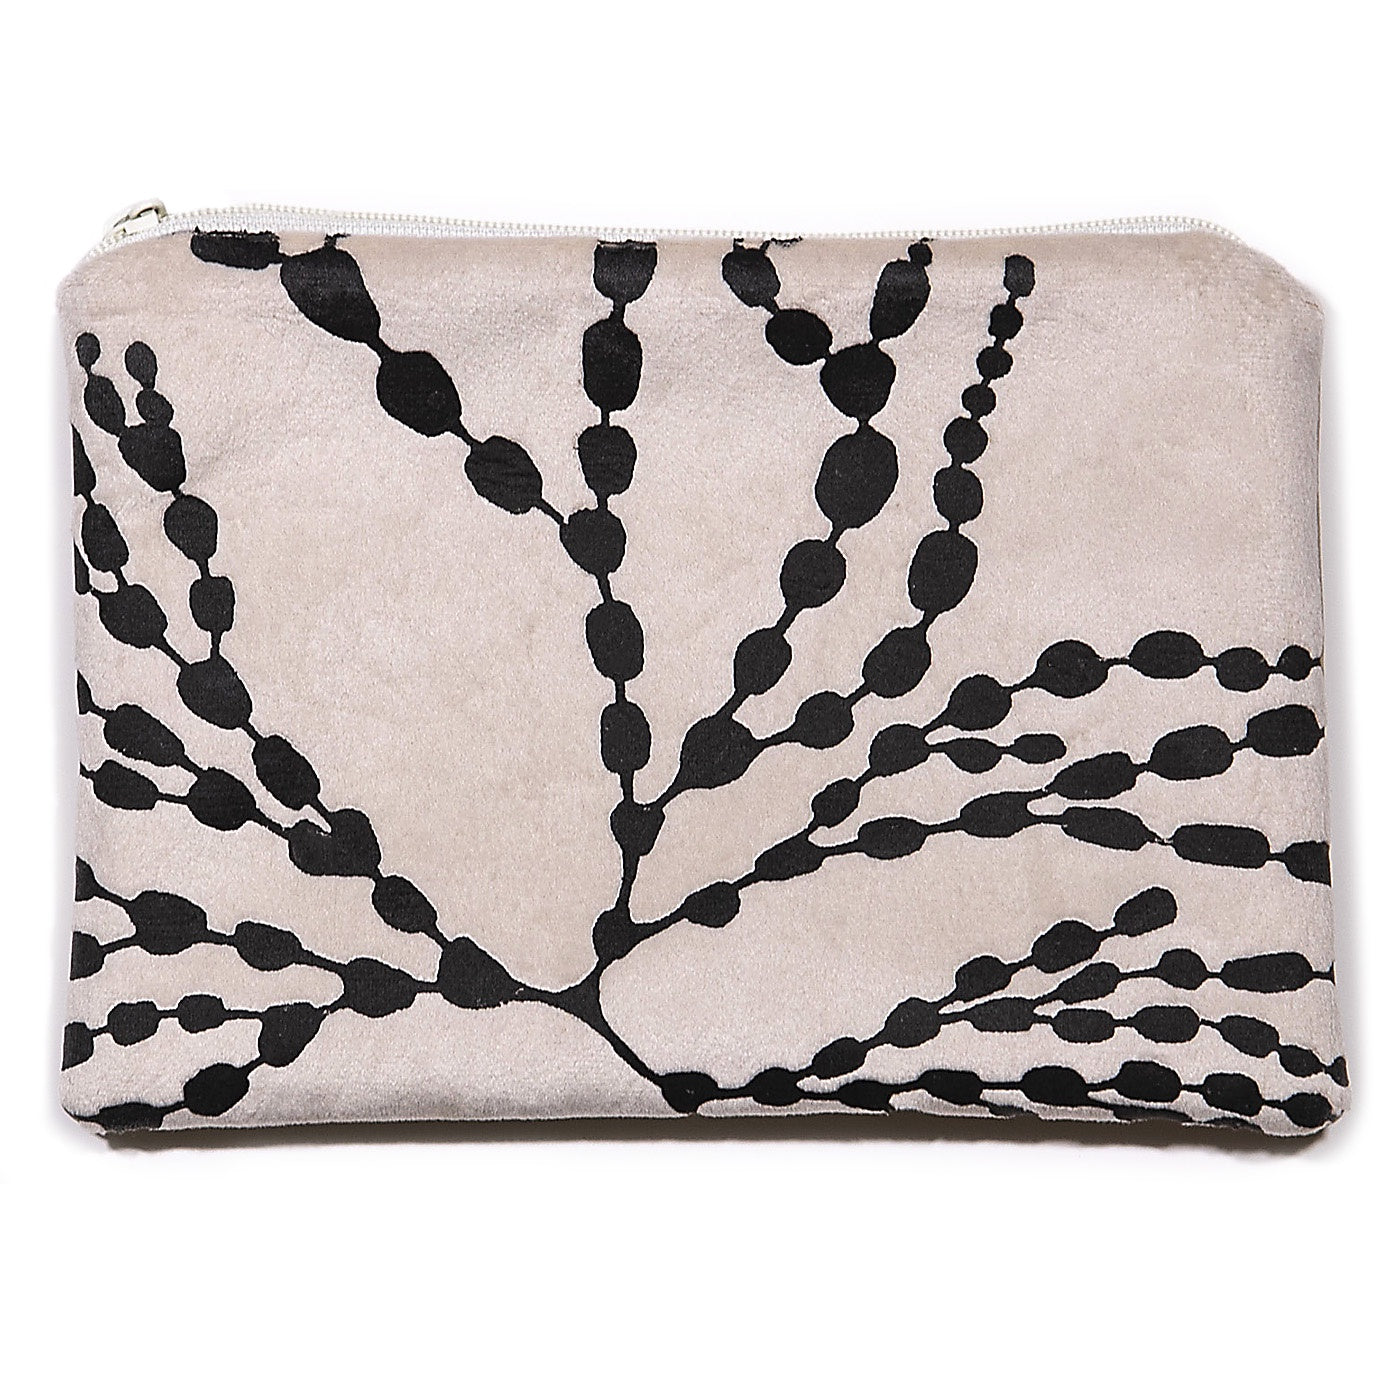 Stalley Textile Co - Zip Purse - Large - Bubbleweed - Black on Cream